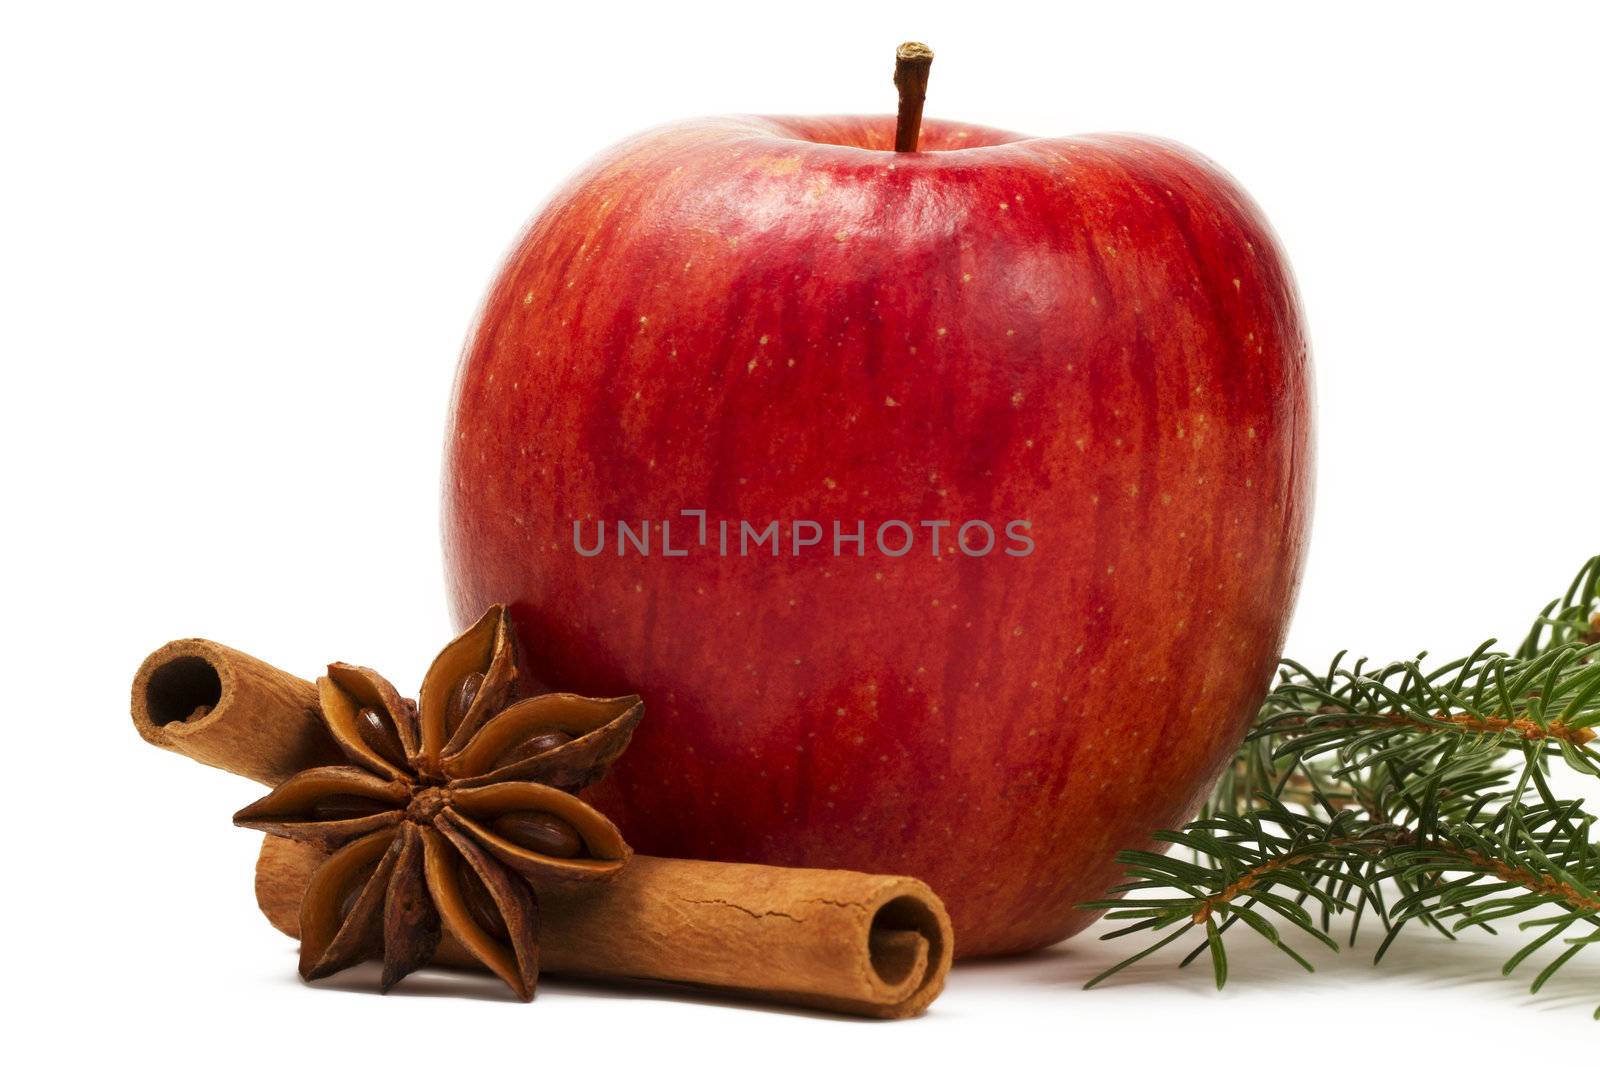 apple star anise cinnamon sticks and a branch on white background